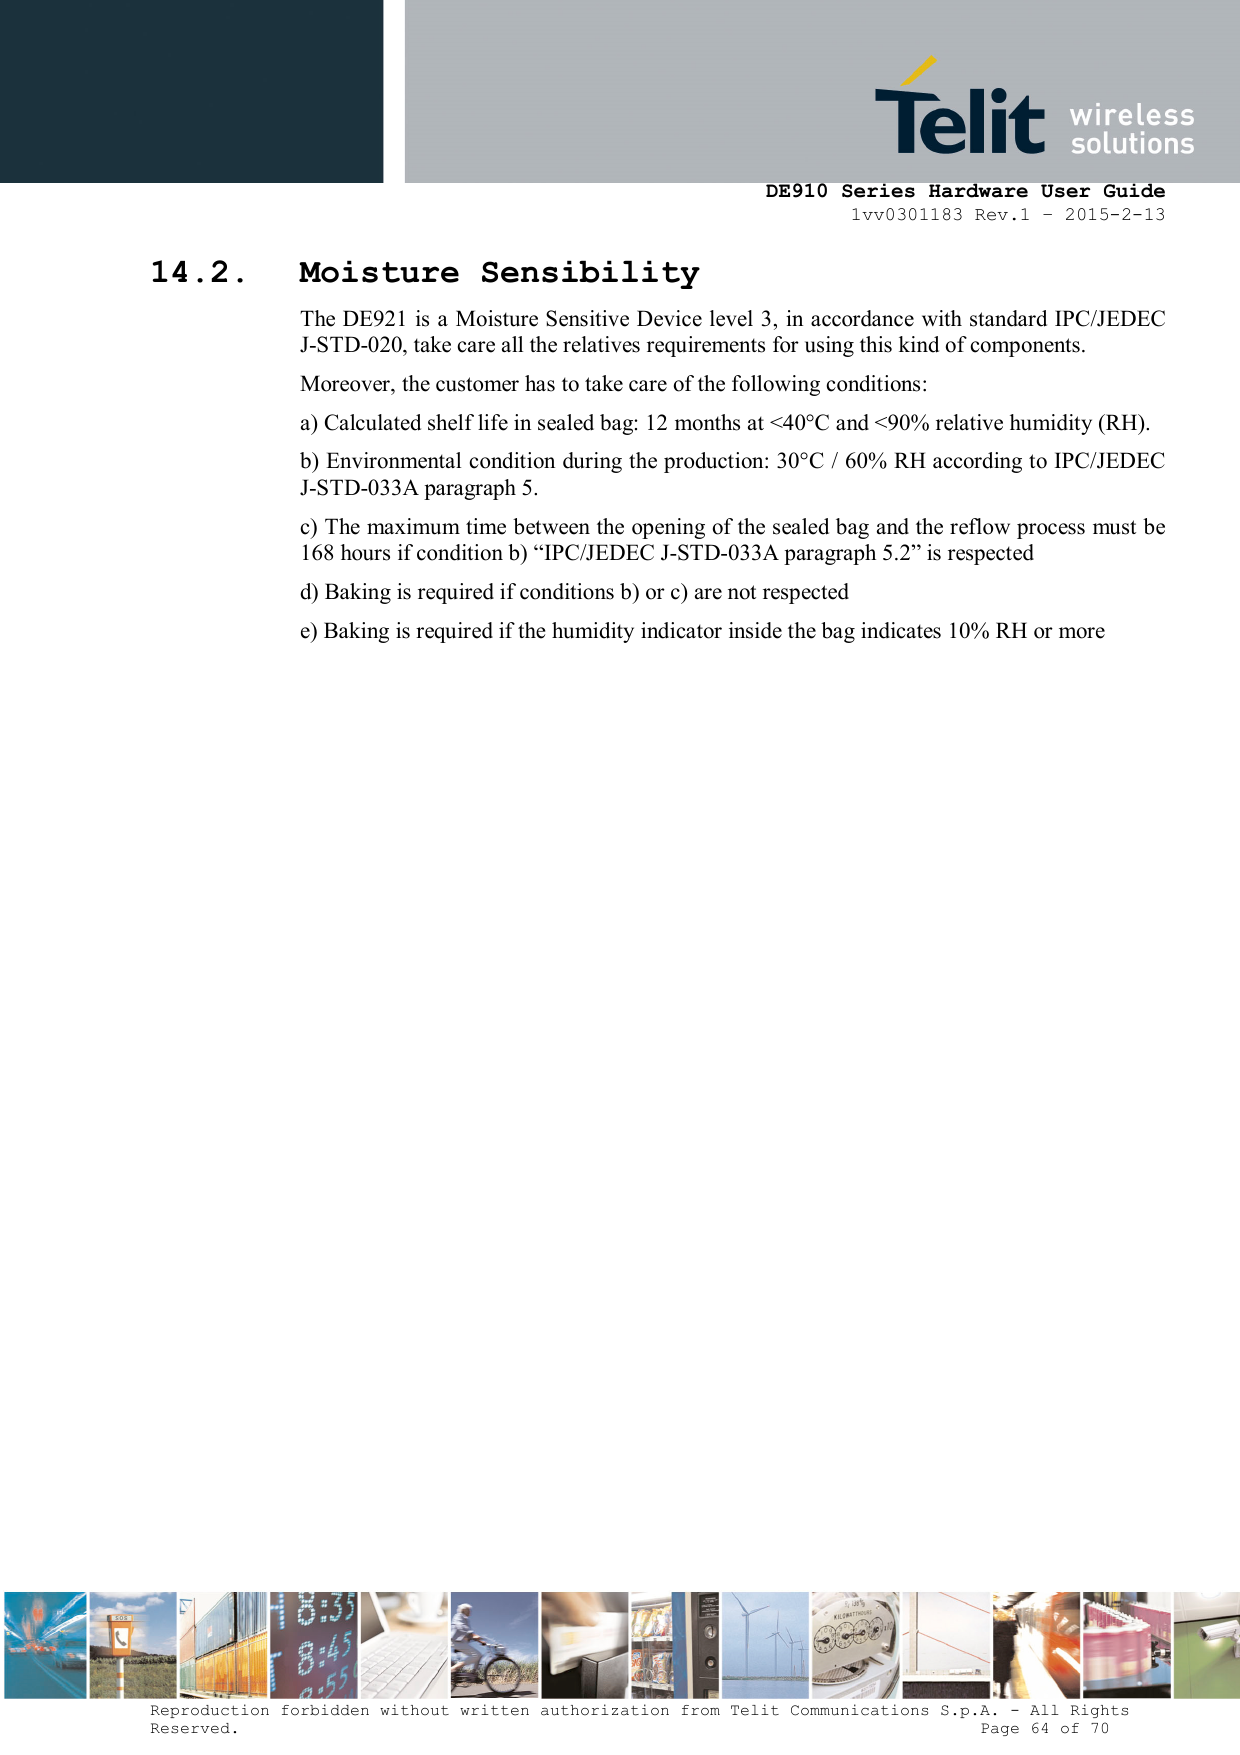      DE910 Series Hardware User Guide 1vv0301183 Rev.1 – 2015-2-13 Reproduction forbidden without written authorization from Telit Communications S.p.A. - All Rights Reserved.                                                                          Page 64 of 70 14.2. Moisture Sensibility The DE921 is a Moisture Sensitive Device level 3, in accordance with standard IPC/JEDEC J-STD-020, take care all the relatives requirements for using this kind of components. Moreover, the customer has to take care of the following conditions: a) Calculated shelf life in sealed bag: 12 months at &lt;40°C and &lt;90% relative humidity (RH).  b) Environmental condition during the production: 30°C / 60% RH according to IPC/JEDEC J-STD-033A paragraph 5.  c) The maximum time between the opening of the sealed bag and the reflow process must be 168 hours if condition b) “IPC/JEDEC J-STD-033A paragraph 5.2” is respected  d) Baking is required if conditions b) or c) are not respected  e) Baking is required if the humidity indicator inside the bag indicates 10% RH or more    